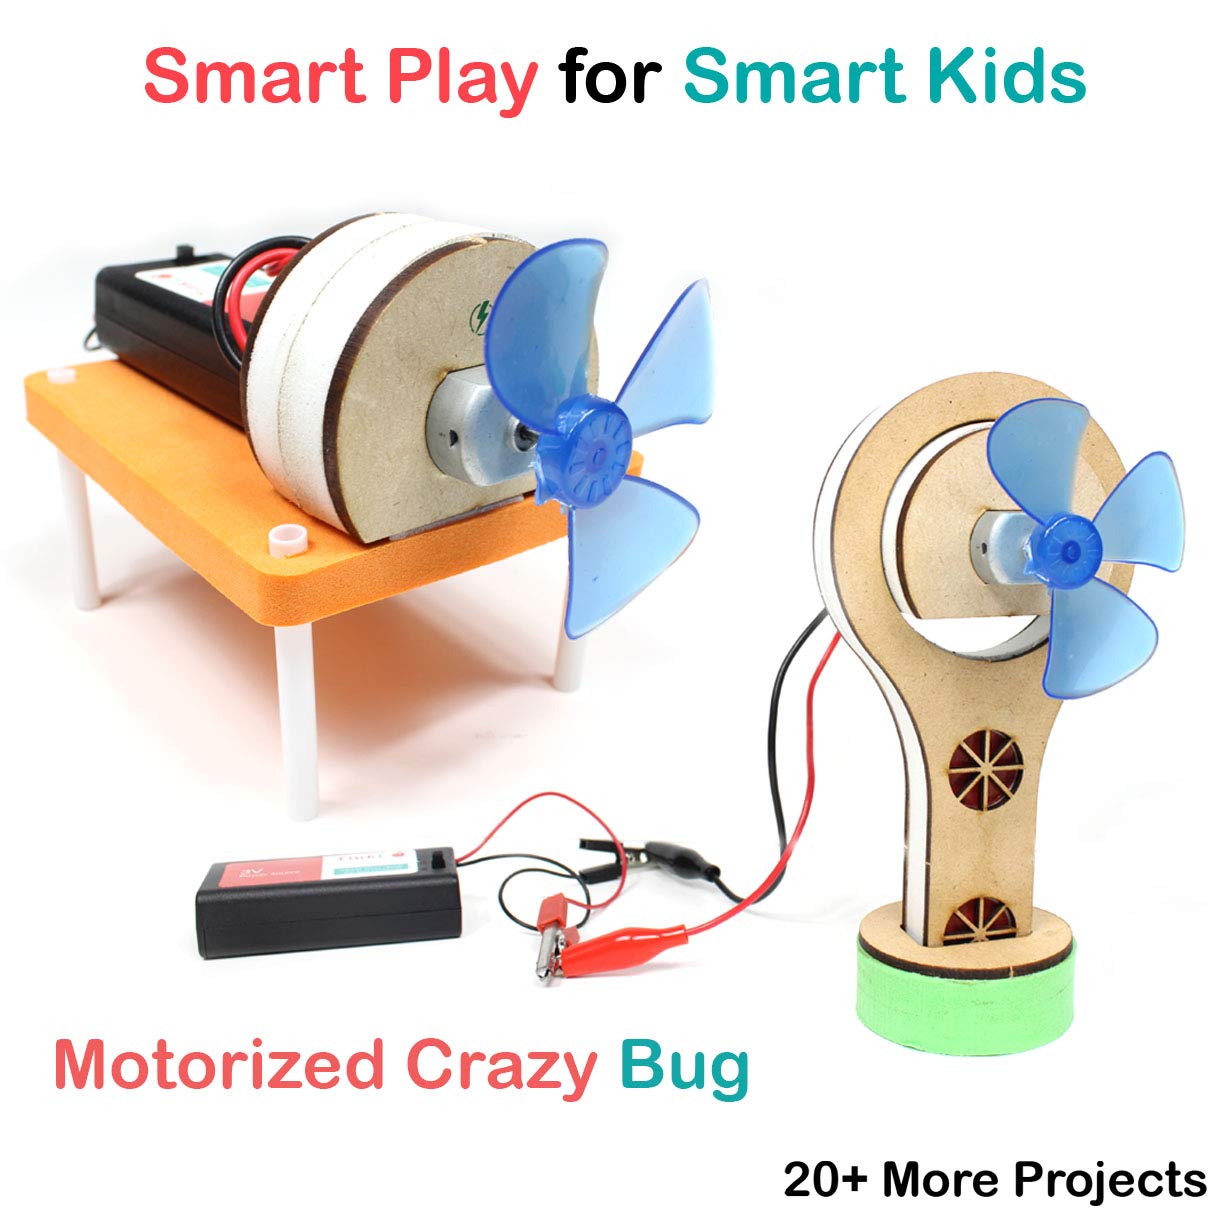 STEM Electric Machines Projects Kit